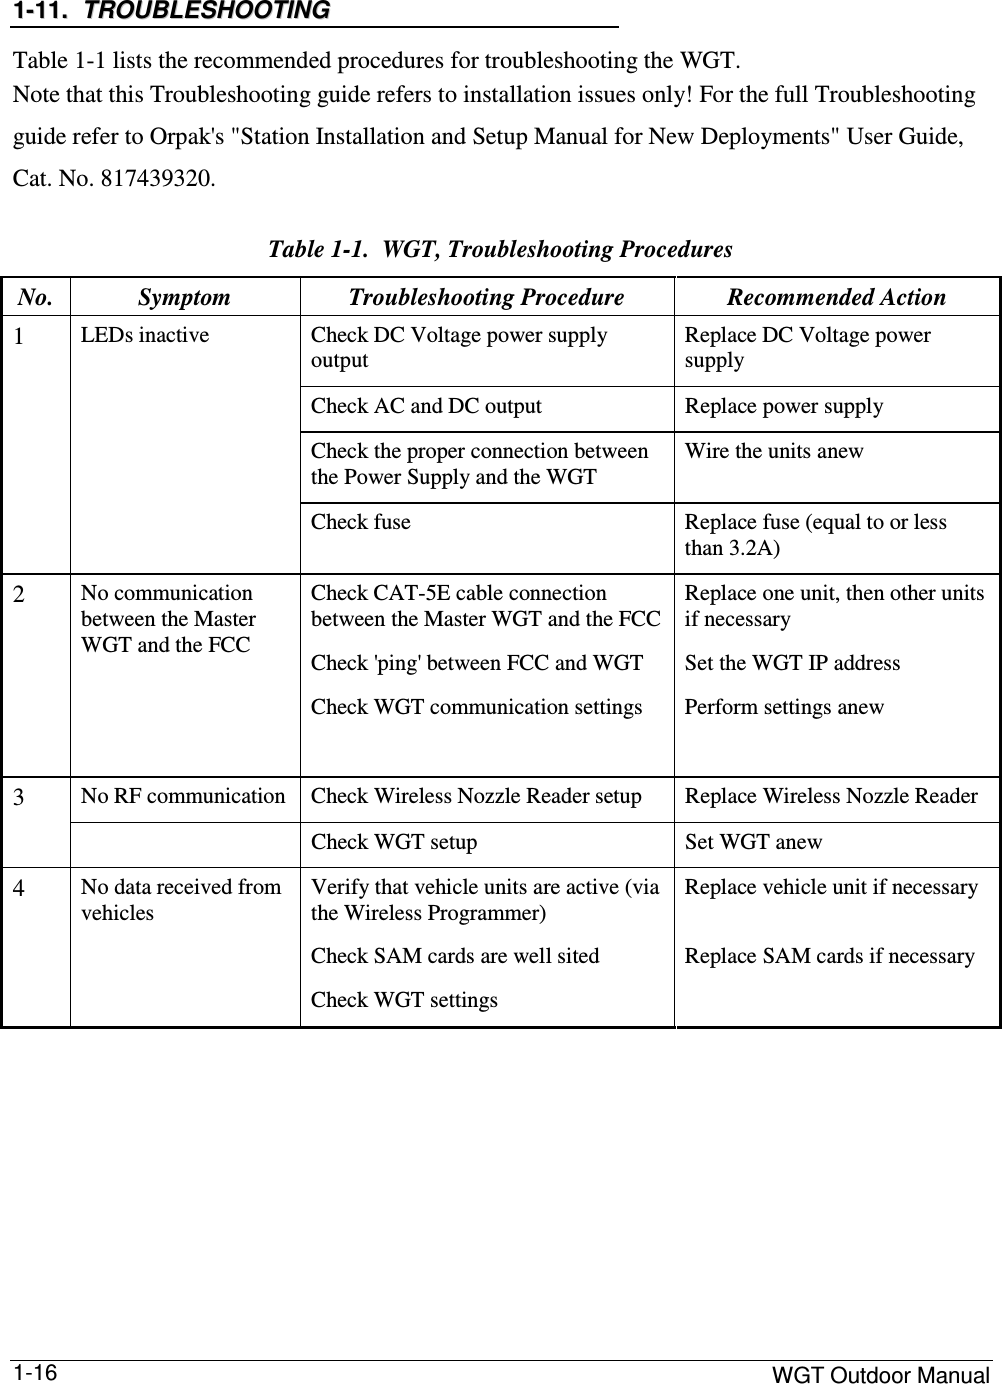     WGT Outdoor Manual  1-16 11--1111..  TTRROOUUBBLLEESSHHOOOOTTIINNGG  Table  1-1 lists the recommended procedures for troubleshooting the WGT.  Note that this Troubleshooting guide refers to installation issues only! For the full Troubleshooting guide refer to Orpak&apos;s &quot;Station Installation and Setup Manual for New Deployments&quot; User Guide,                  Cat. No. 817439320.   Table  1-1.  WGT, Troubleshooting Procedures  No.  Symptom   Troubleshooting Procedure   Recommended Action  Check DC Voltage power supply output  Replace DC Voltage power supply Check AC and DC output   Replace power supply Check the proper connection between the Power Supply and the WGT  Wire the units anew  1 LEDs inactive  Check fuse  Replace fuse (equal to or less than 3.2A) 2 No communication between the Master WGT and the FCC  Check CAT-5E cable connection between the Master WGT and the FCC Check &apos;ping&apos; between FCC and WGT Check WGT communication settings  Replace one unit, then other units if necessary  Set the WGT IP address   Perform settings anew No RF communication  Check Wireless Nozzle Reader setup   Replace Wireless Nozzle Reader  3   Check WGT setup   Set WGT anew  4 No data received from vehicles  Verify that vehicle units are active (via the Wireless Programmer) Check SAM cards are well sited  Check WGT settings Replace vehicle unit if necessary  Replace SAM cards if necessary   